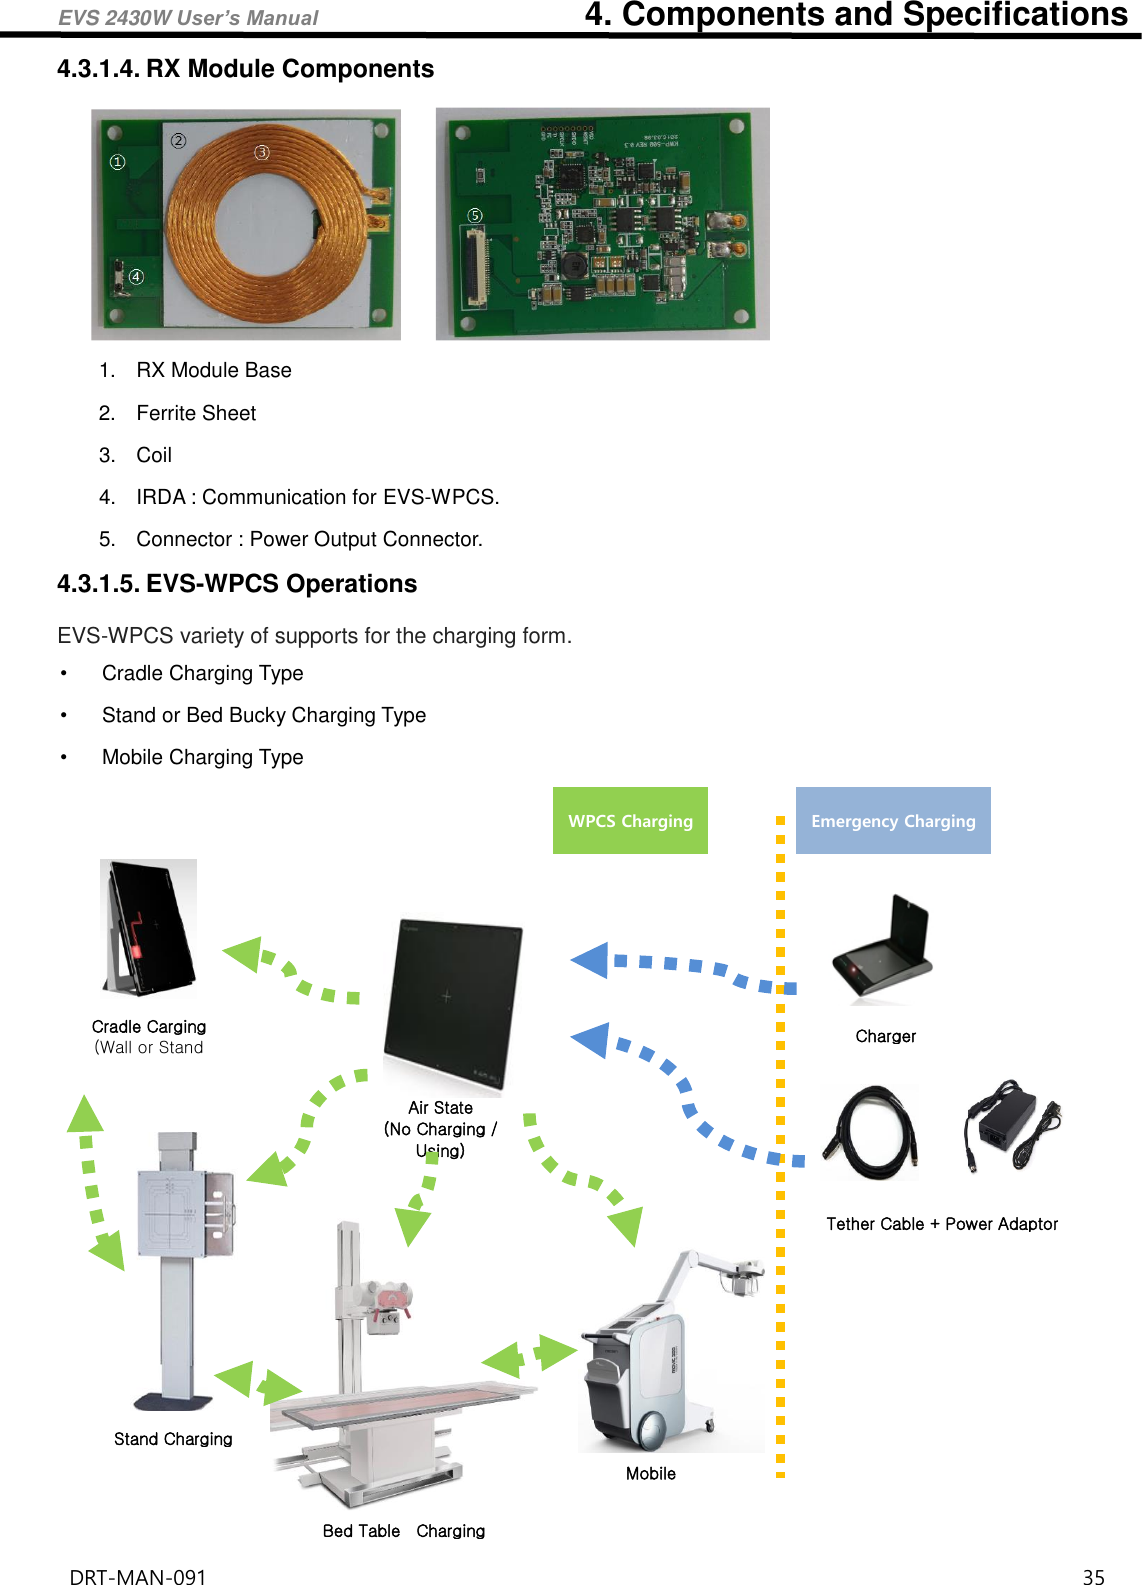 EVS 2430W User’s Manual                                4. Components and Specifications DRT-MAN-091                                                                                    35  4.3.1.4. RX Module Components      1.  RX Module Base 2.  Ferrite Sheet 3.  Coil 4.  IRDA : Communication for EVS-WPCS. 5.  Connector : Power Output Connector. 4.3.1.5. EVS-WPCS Operations EVS-WPCS variety of supports for the charging form. •  Cradle Charging Type •  Stand or Bed Bucky Charging Type •  Mobile Charging Type  Cradle Carging (Wall or Stand Air State (No Charging / Using) Stand Charging Bed Table    Charging Mobile   WPCS Charging Emergency Charging Charger Tether Cable + Power Adaptor 